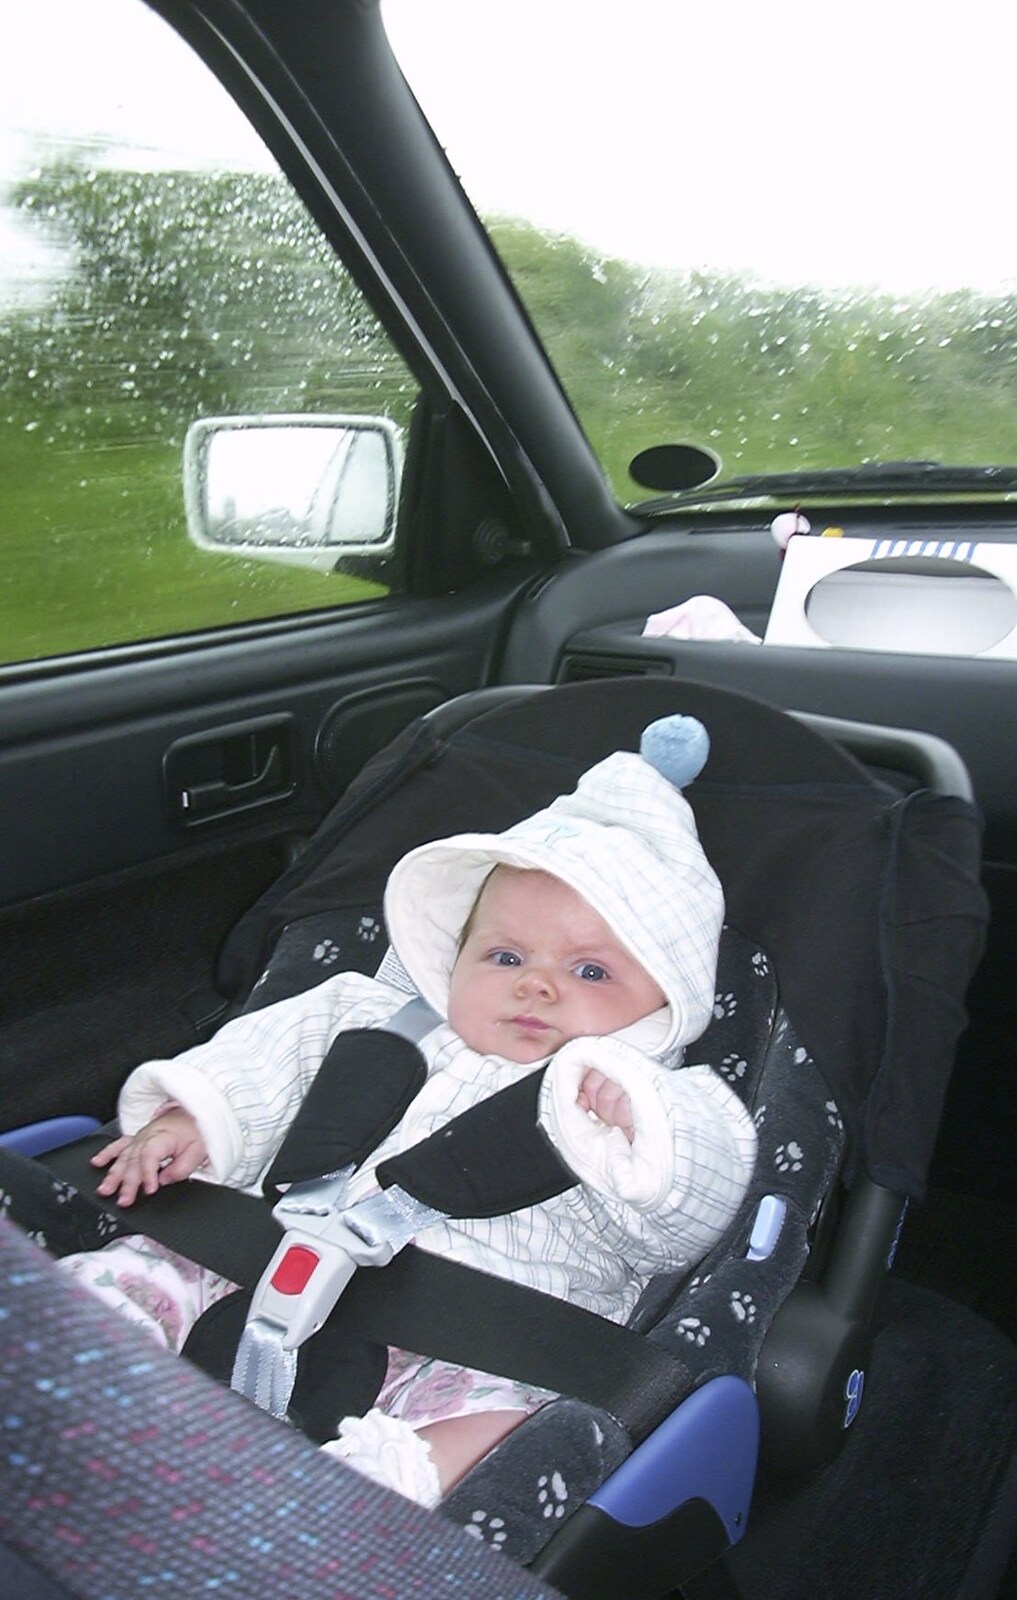 The baby takes preference in the front seat from Sean's New Sprog, New Milton and Hordle, Hampshire - 12th September 2001